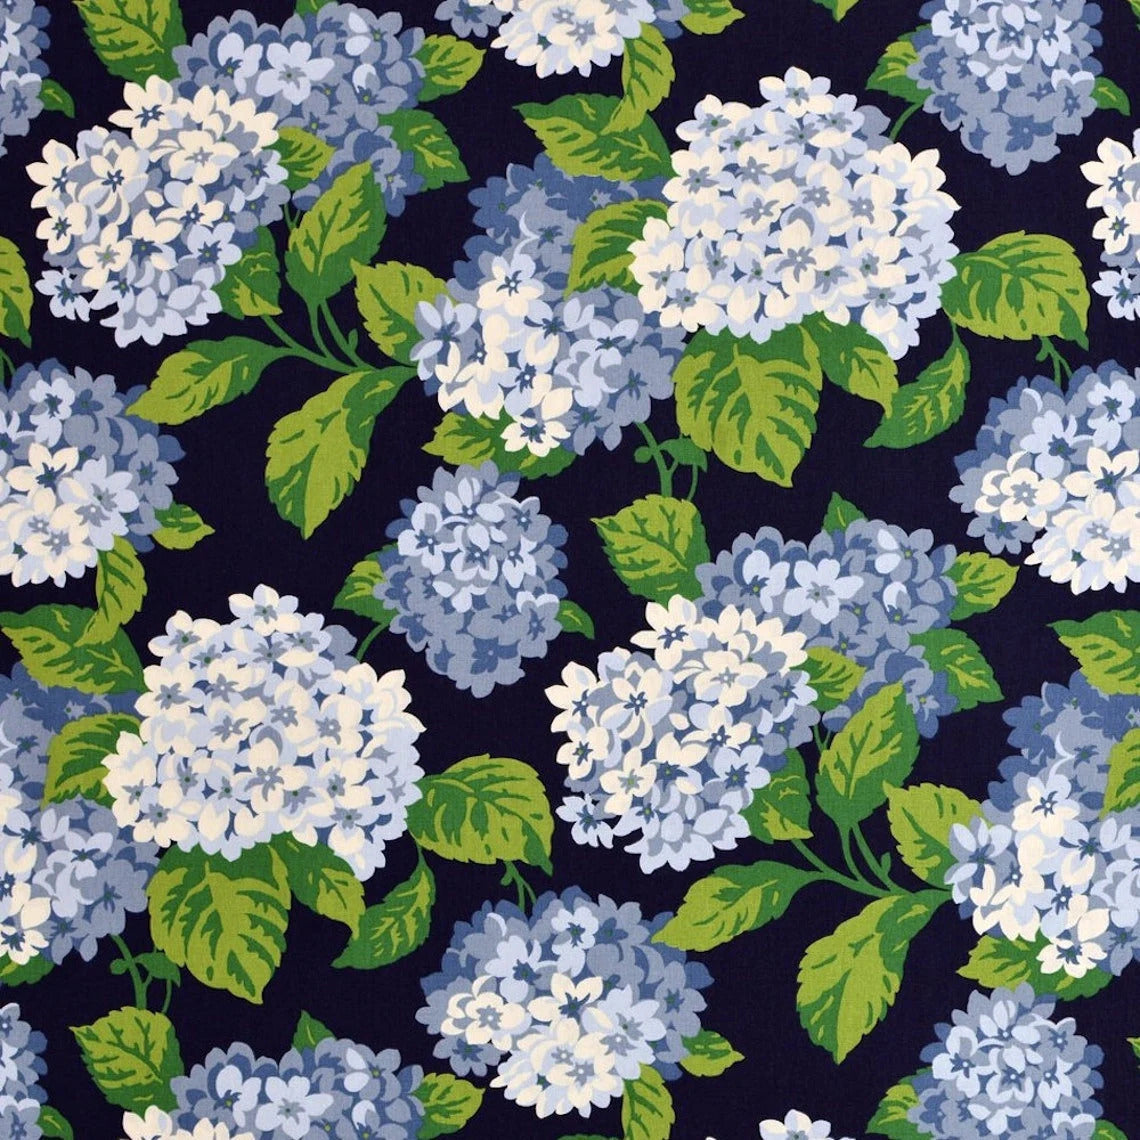 rod pocket curtains in summerwind navy blue hydrangea floral, large scale